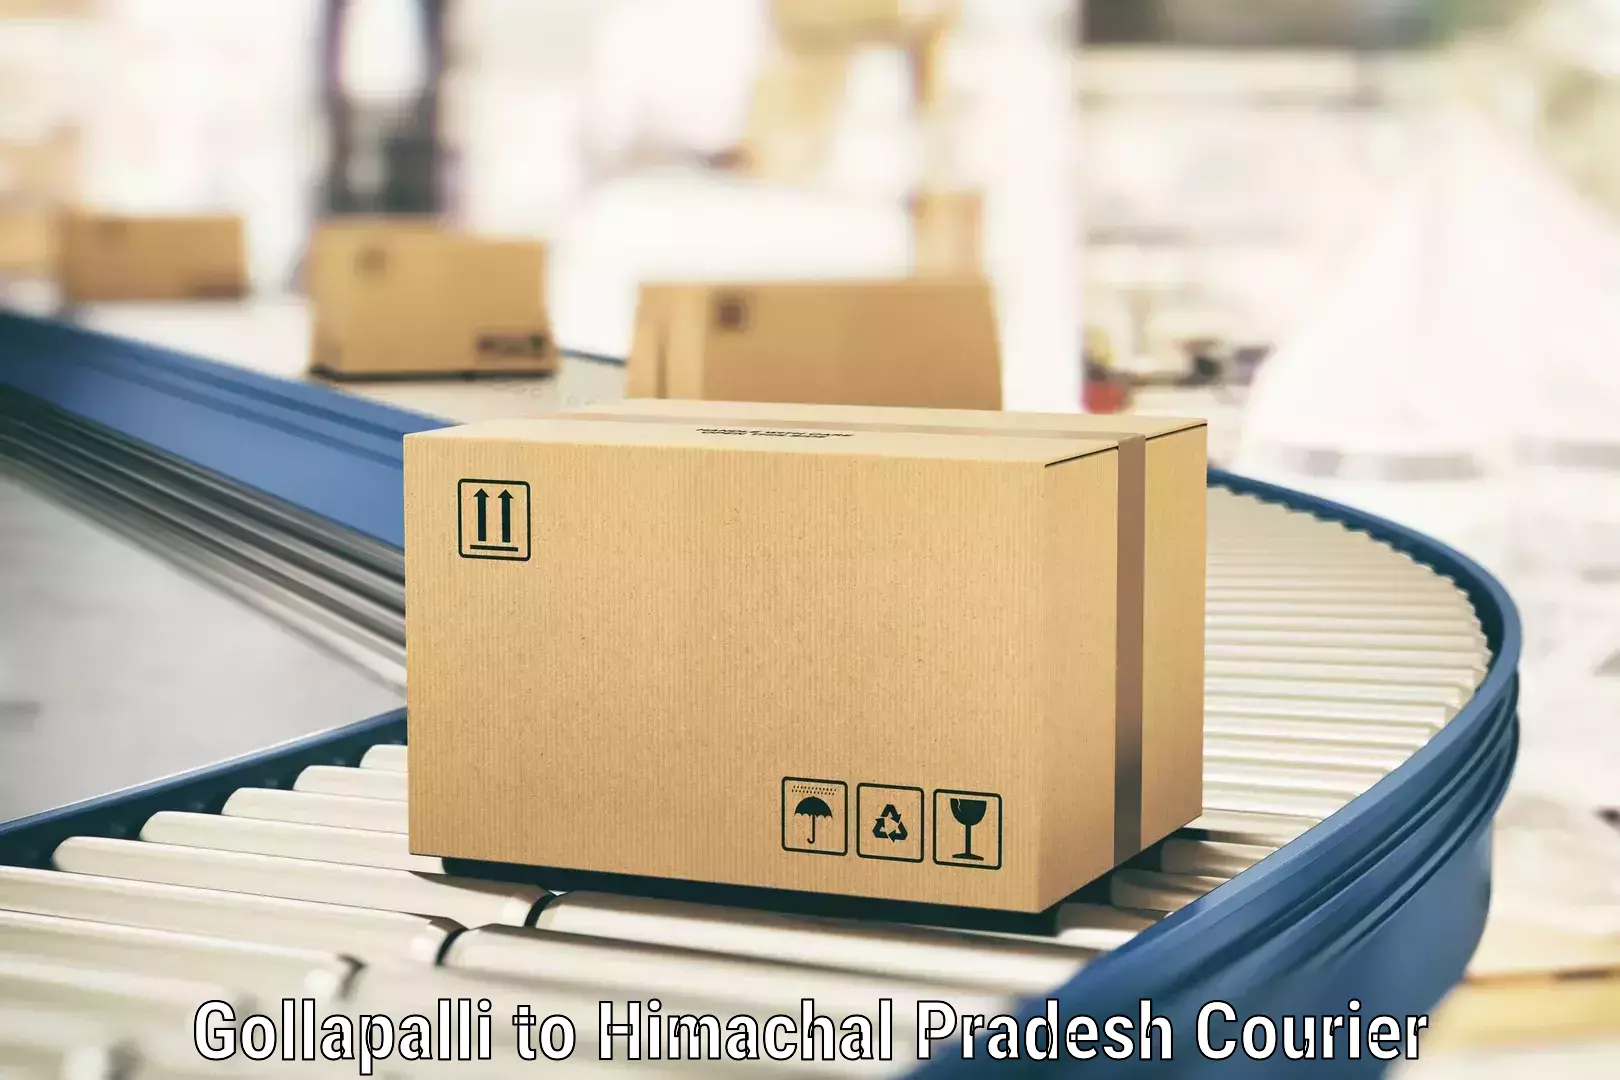 Secure package delivery in Gollapalli to Mandi